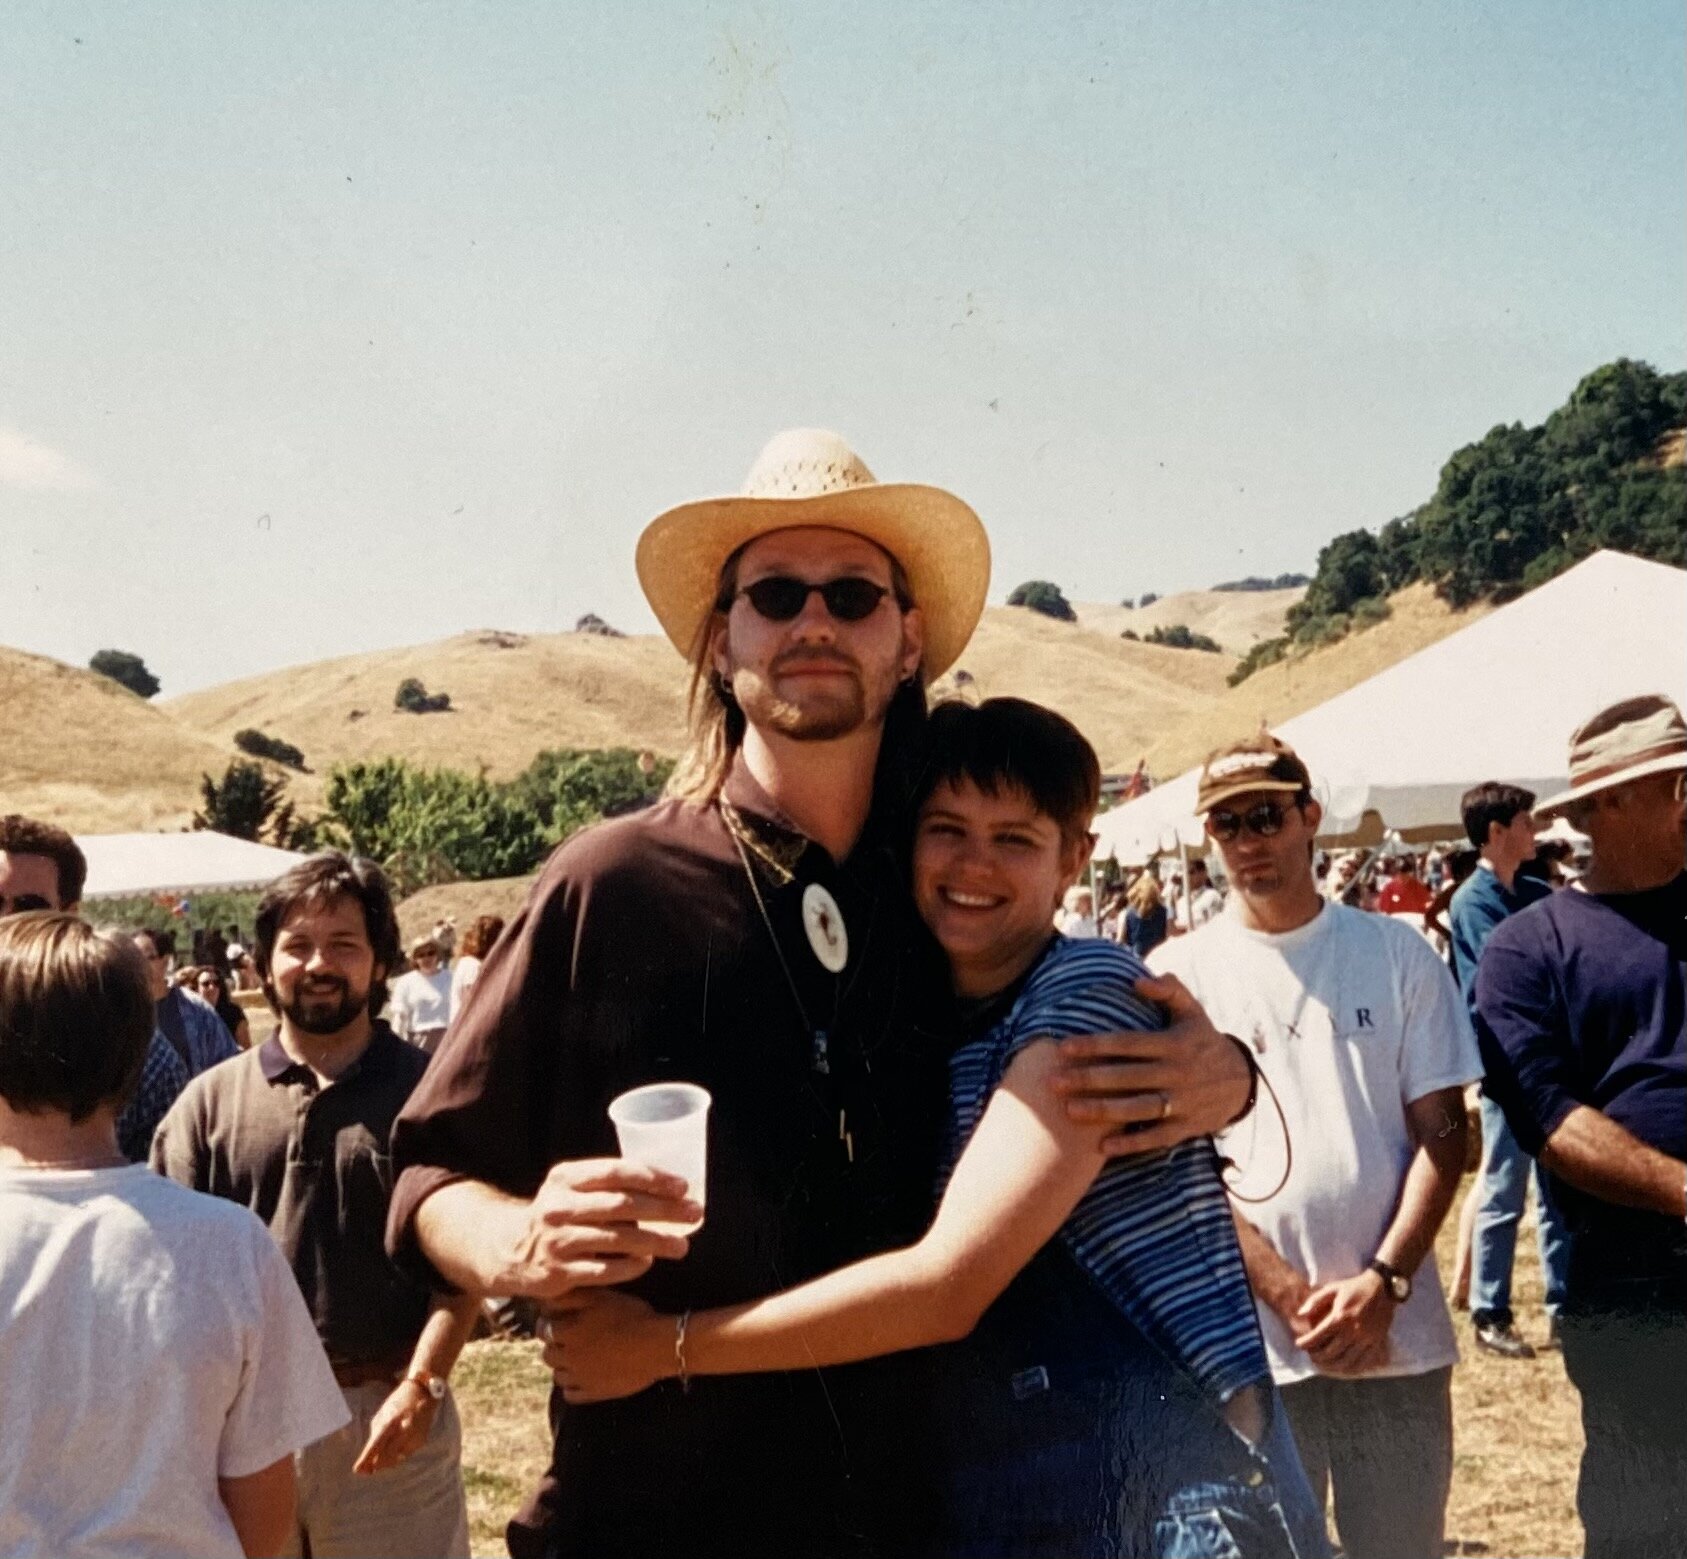  TyRuben Ellingson with Julija at a Lucasfilm 4th of July picnic. Note the young George Murphy in the background.  